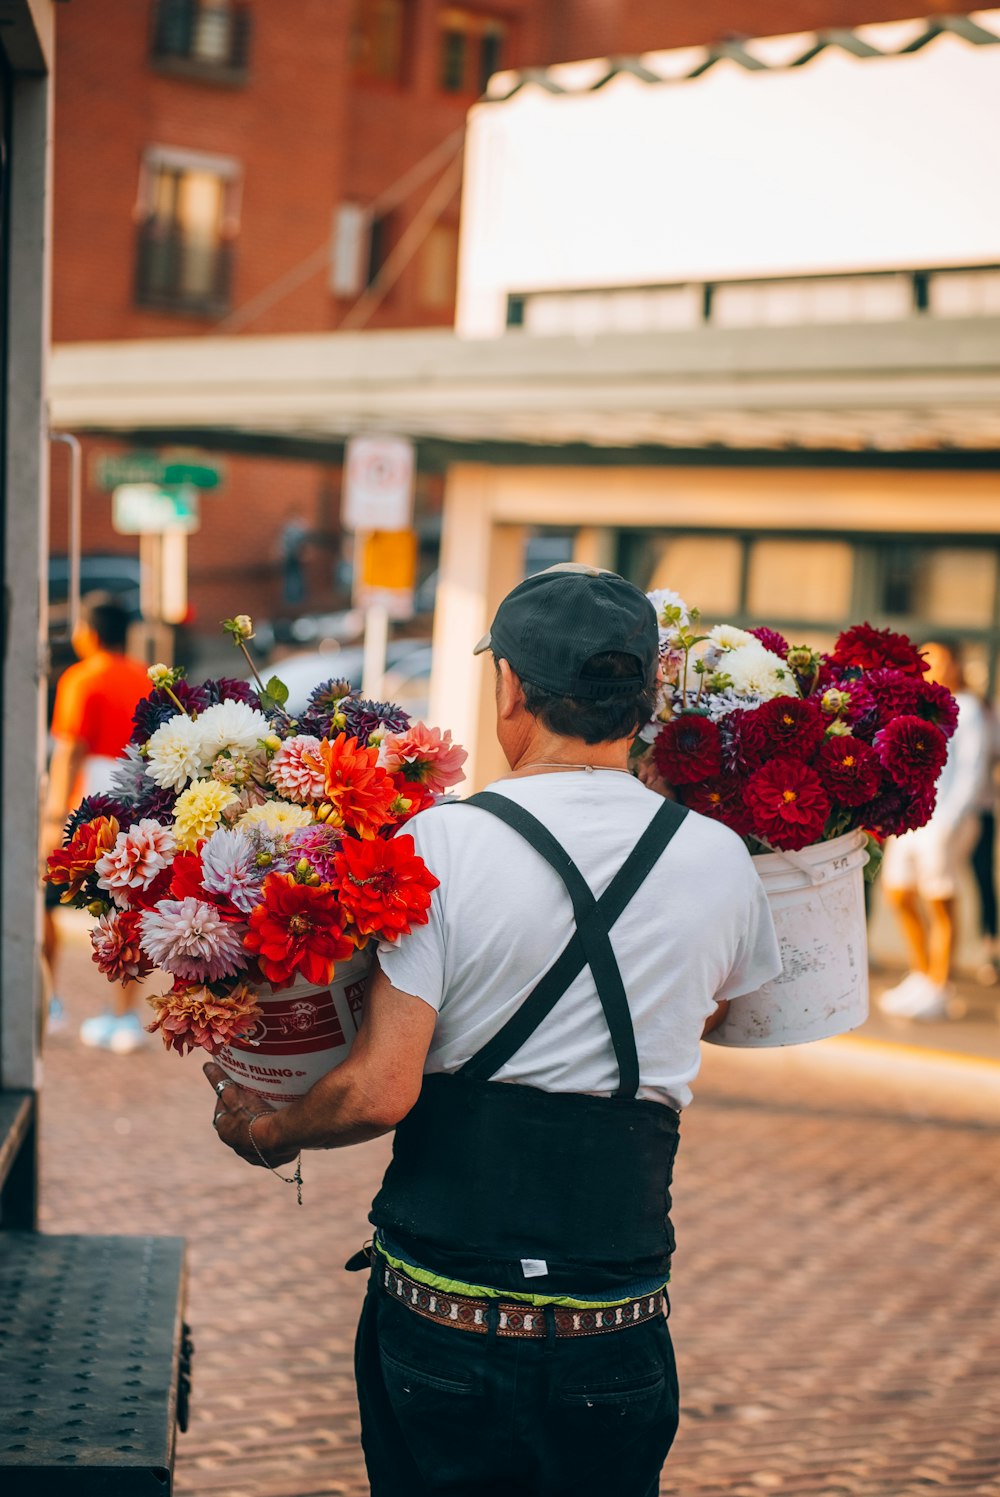 a man carrying a bunch of flowers down a street